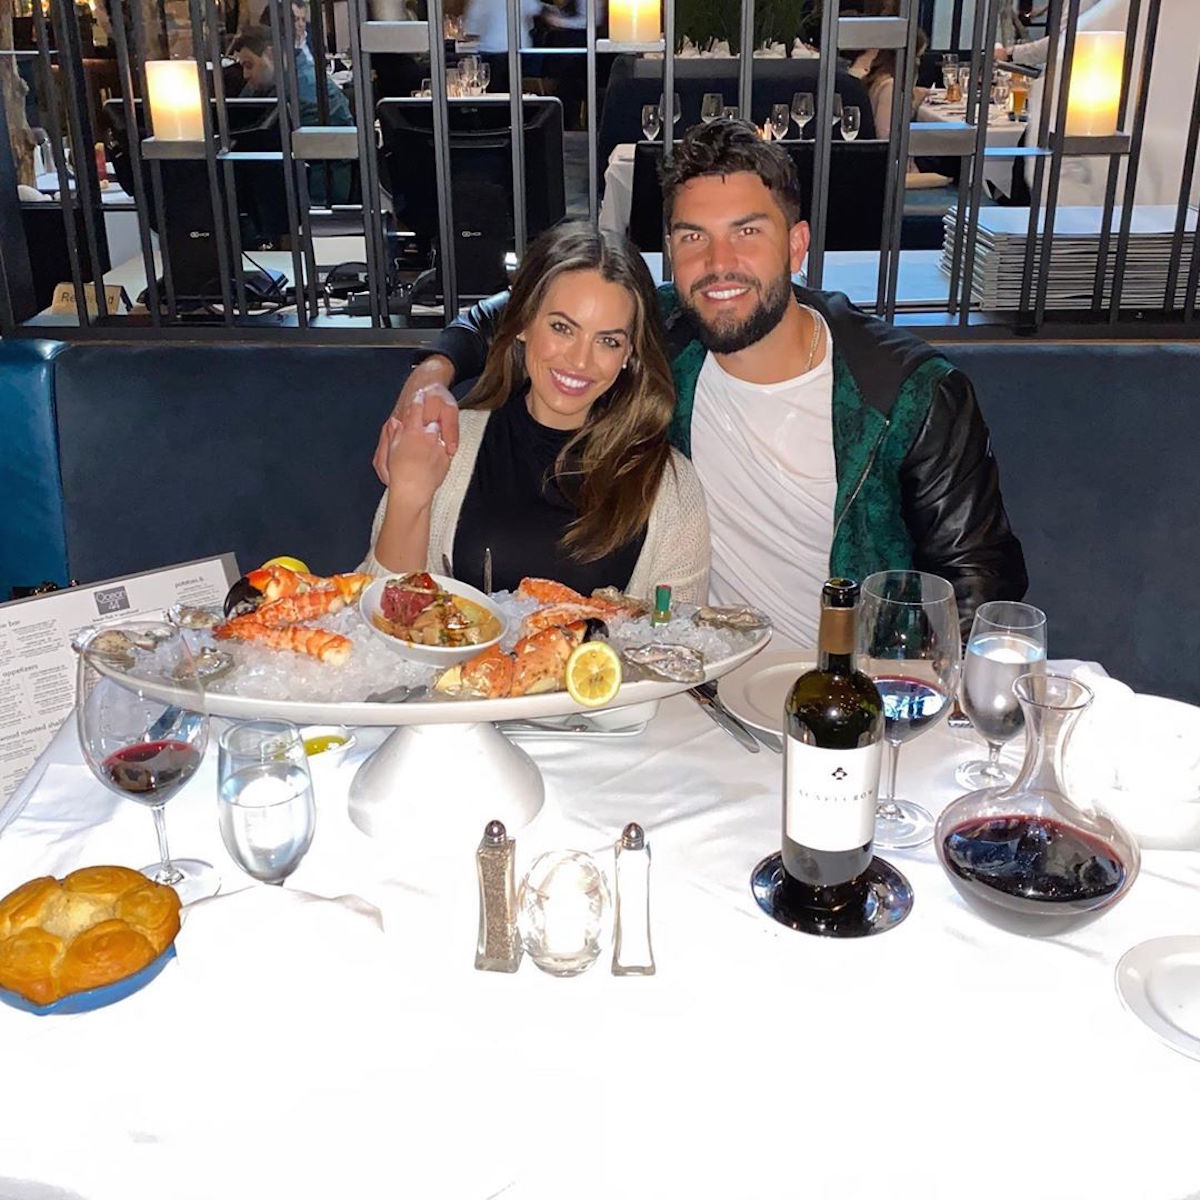 Eric Hosmer with his wife Kacie McDonnell